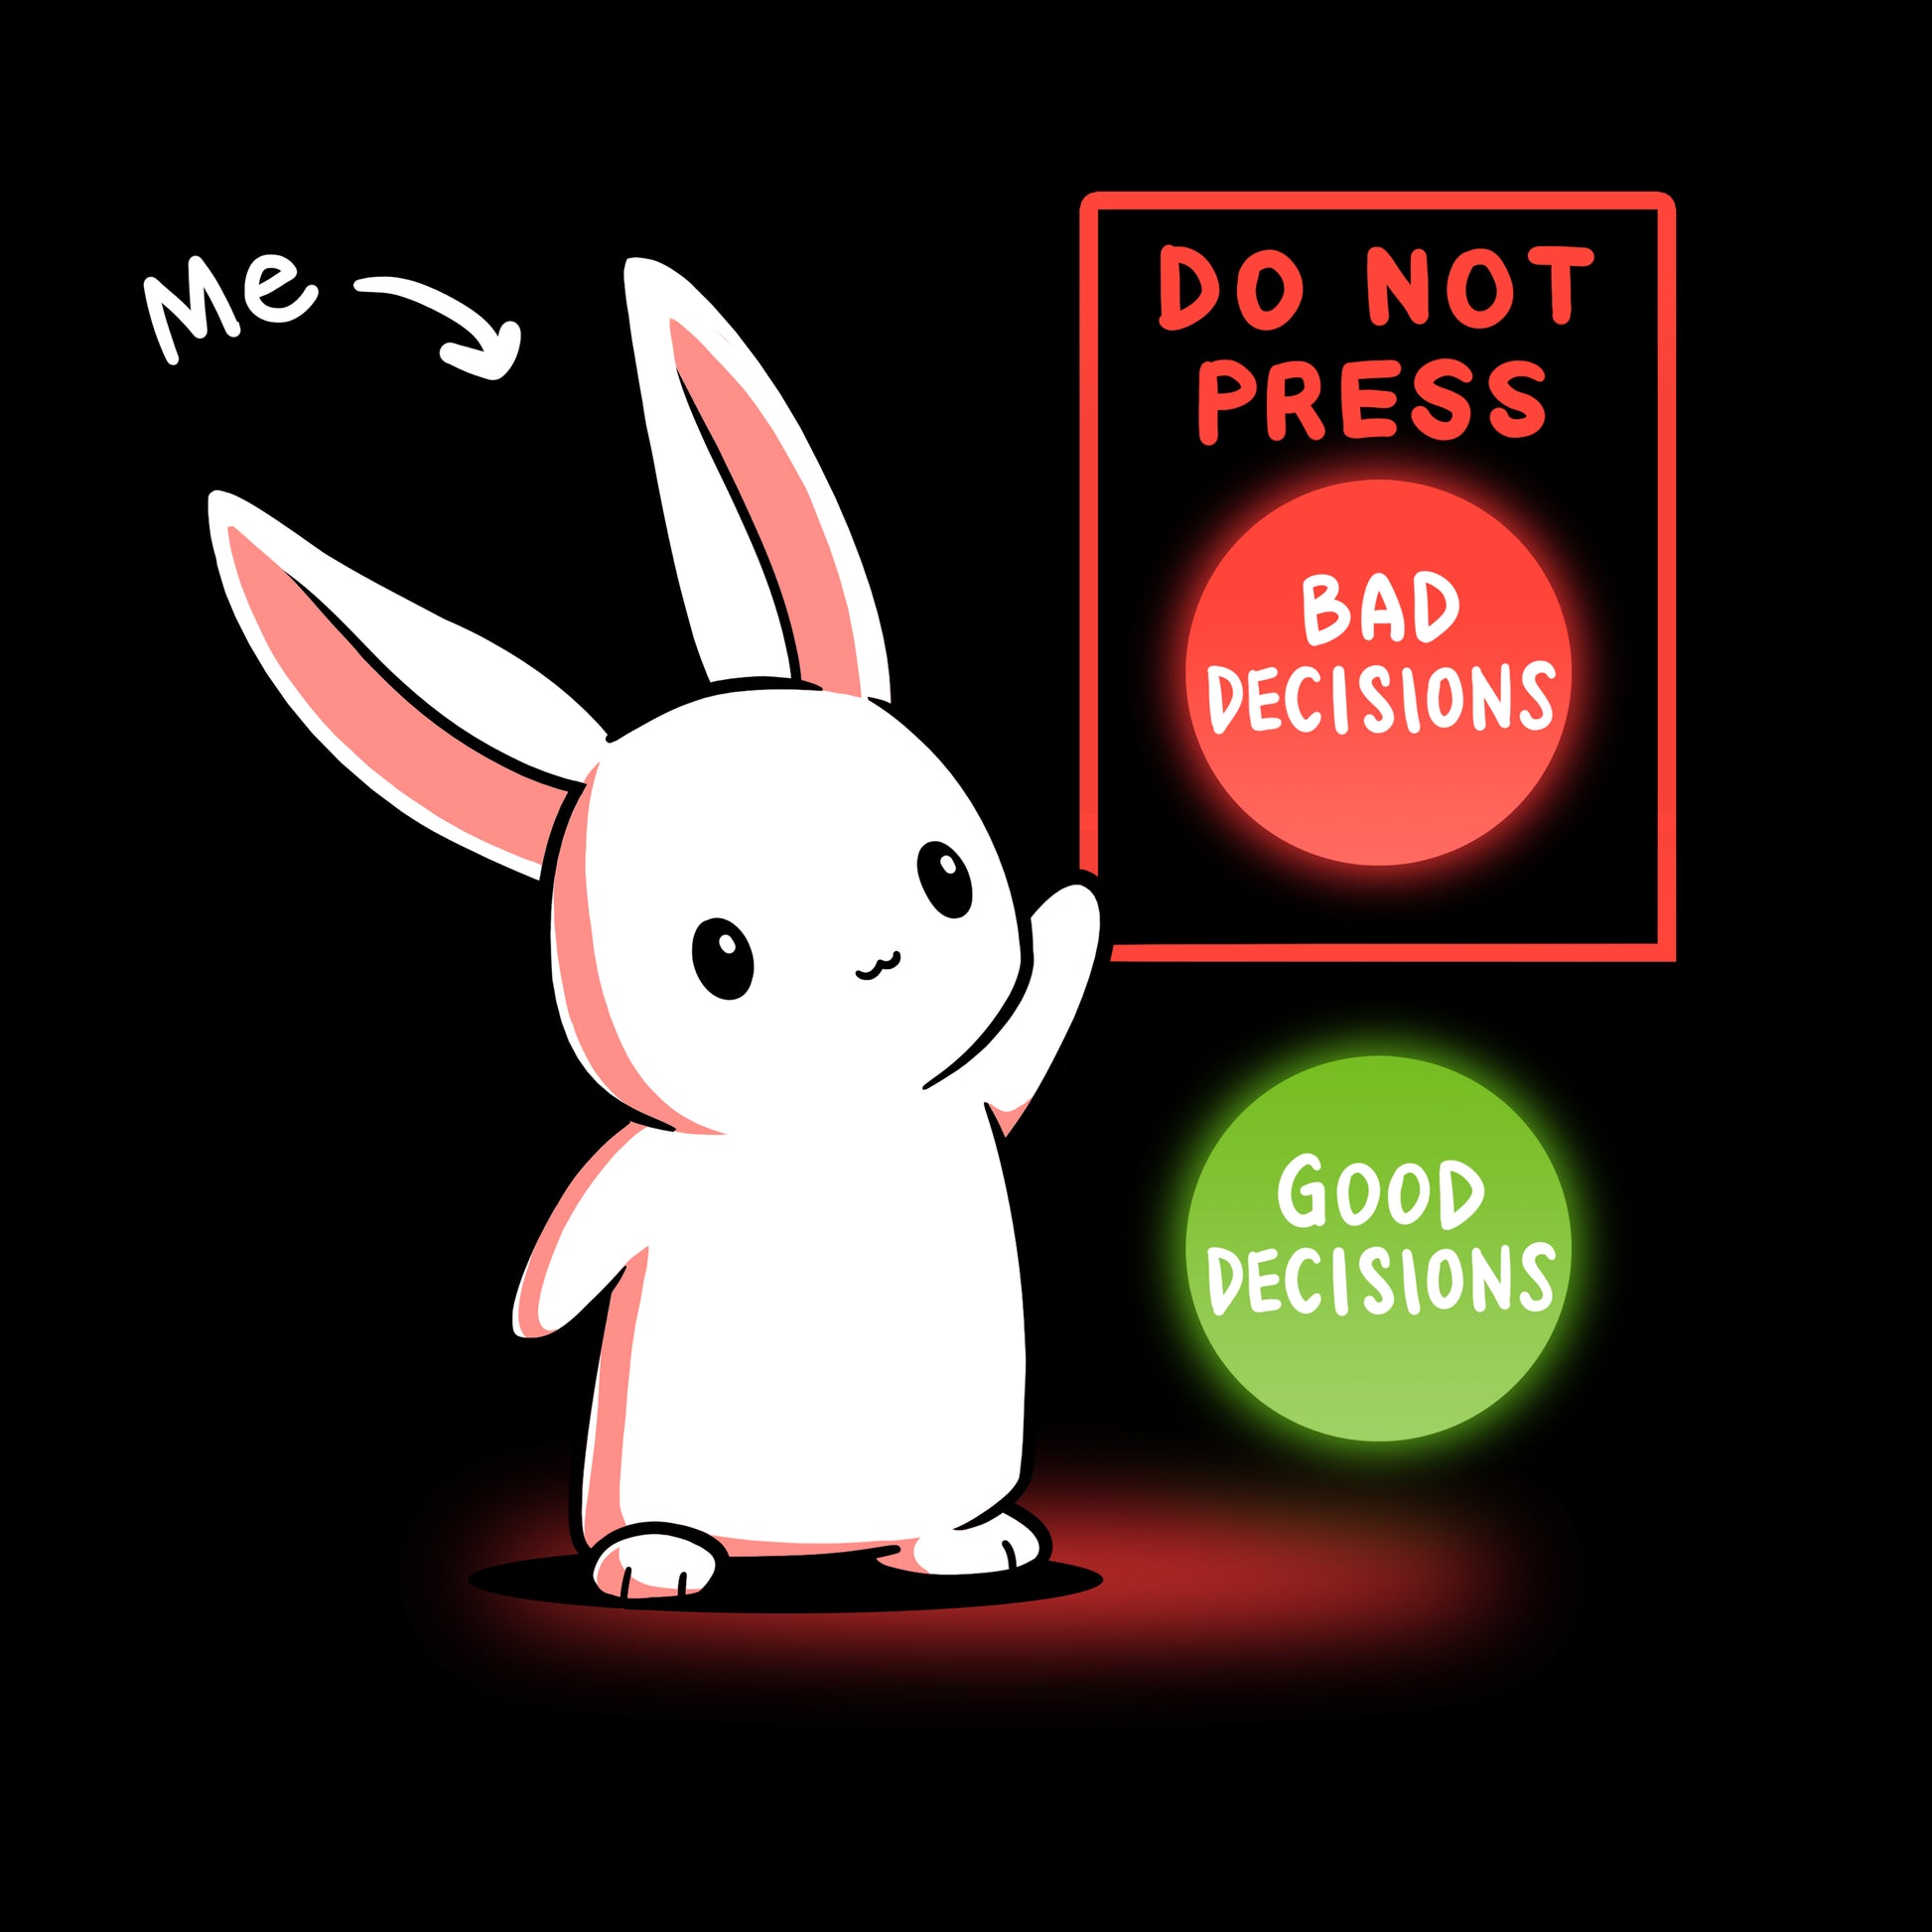 Premium Cotton T-shirt - A cartoon rabbit, the Bad Decision Bunny, labeled "me," points to a red button labeled "BAD DECISIONS" next to a green button labeled "GOOD DECISIONS," with a sign that says "DO NOT PRESS." Available on a super soft ringspun cotton unisex apparelby monsterdigital.